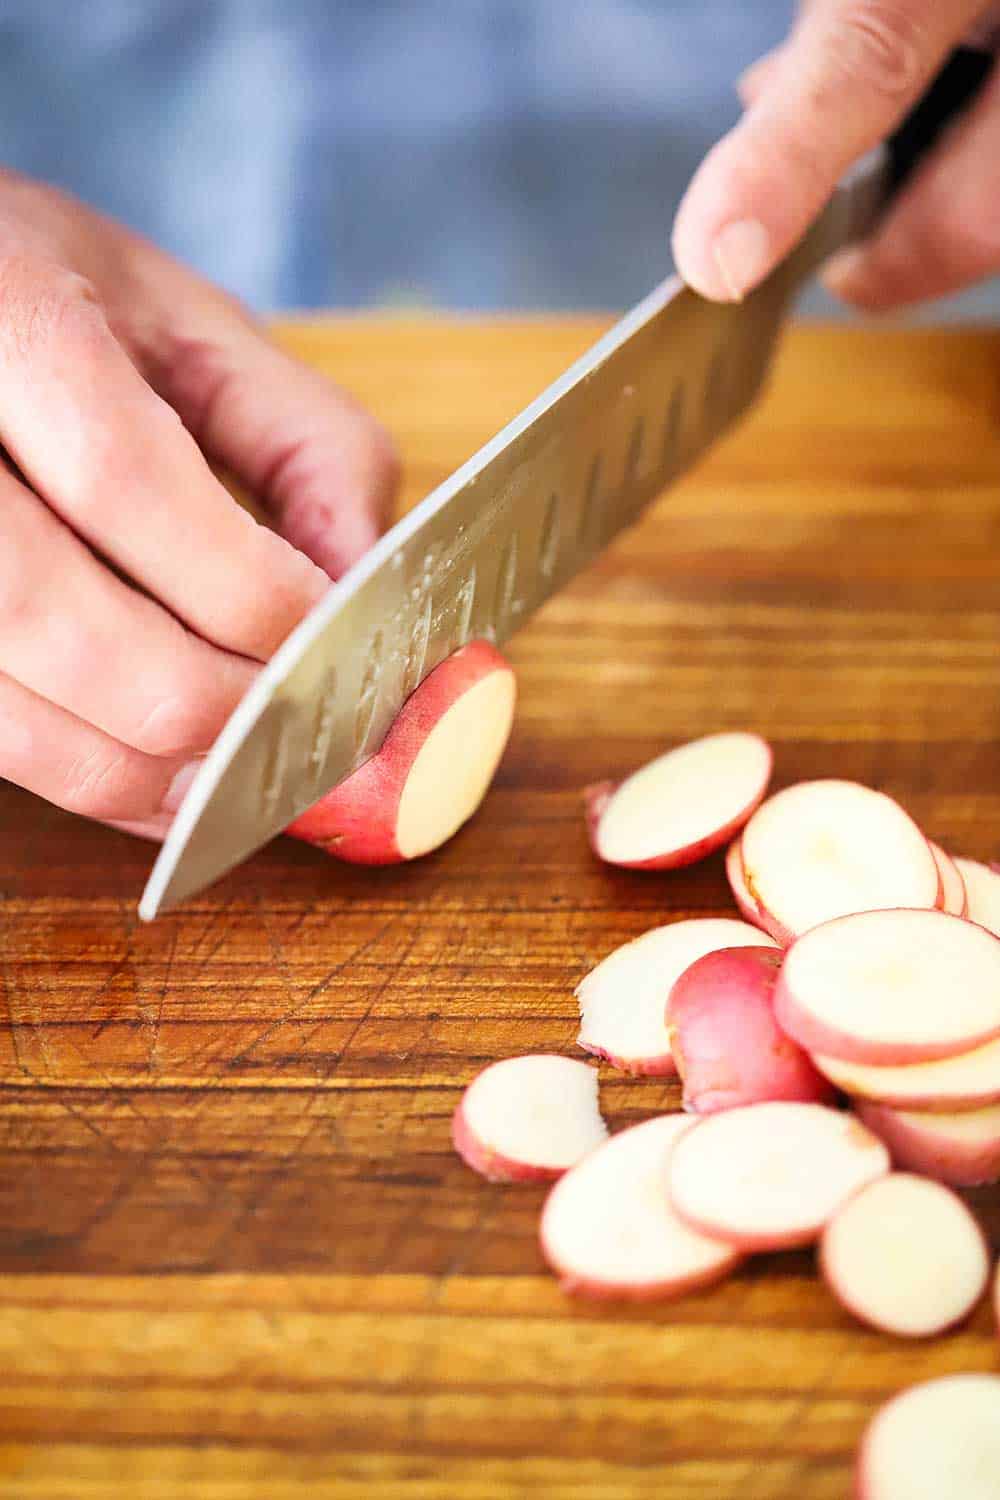 A hand holding a small red potato on a wooden cutting board while the other hand uses a knife to slice it, sitting next to a pile of sliced potatoes.